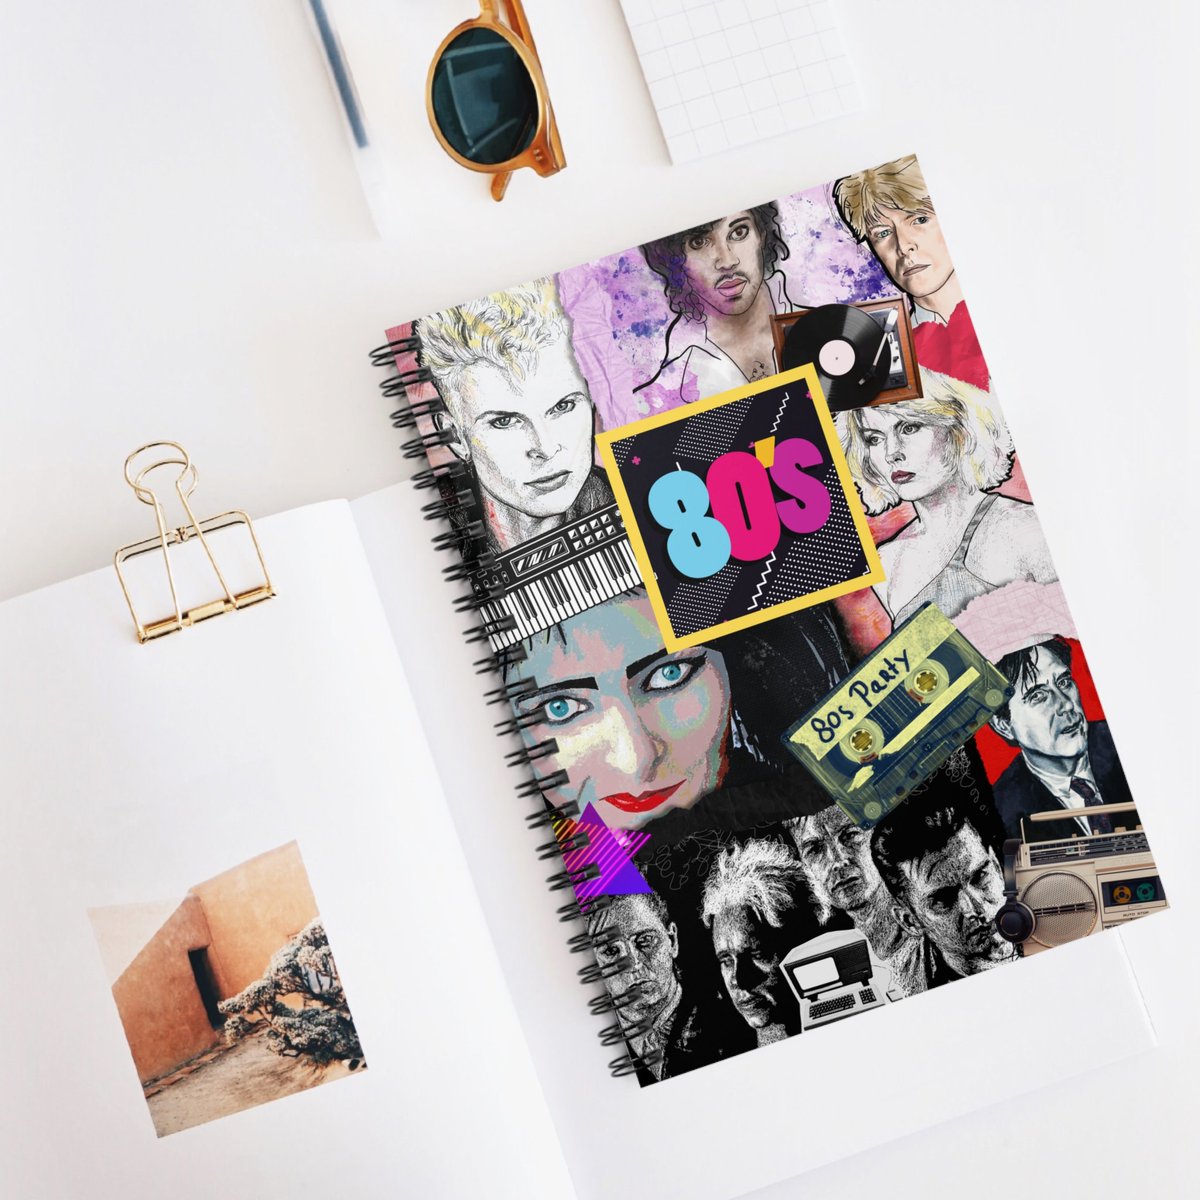 80s New Wave Music Spiral Notebook - Ruled Line, 80s music themed journal, gift idea, featuring Depeche Mode, David Bowie, Blondie and more tuppu.net/a7537225 #GreetingCards #GiftIdeas #Artwork #SpiralNotebook